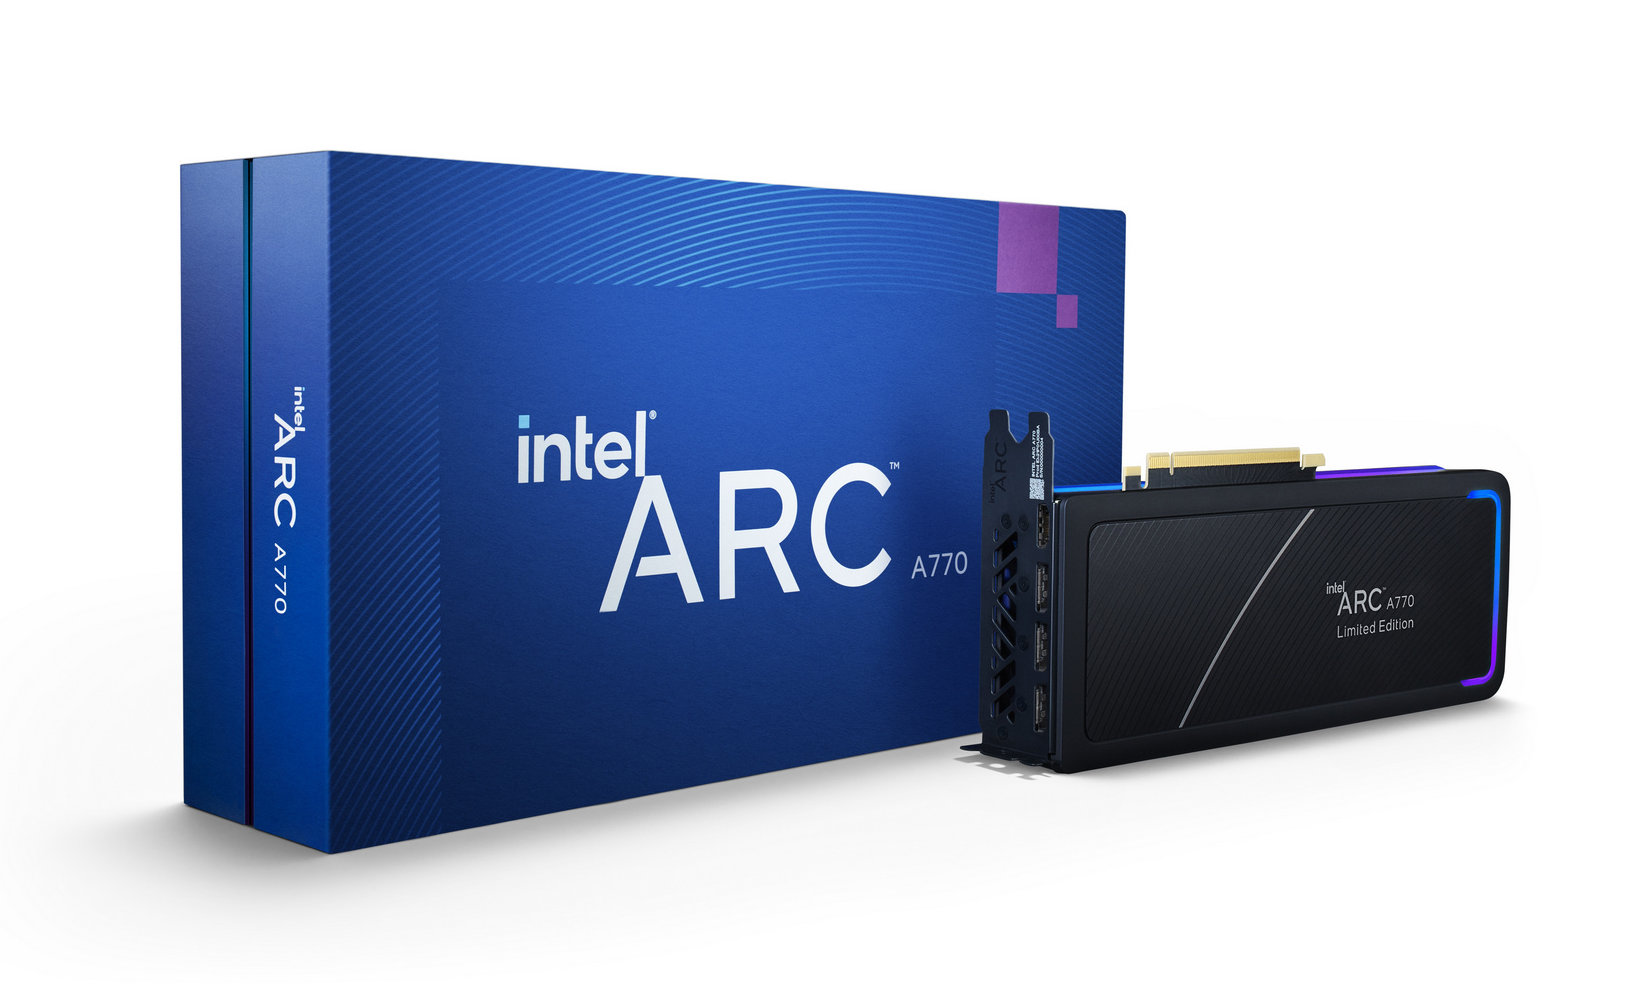 First Intel ARC A770 desktop graphics cards in stores from 12 October for approx. 400 euros